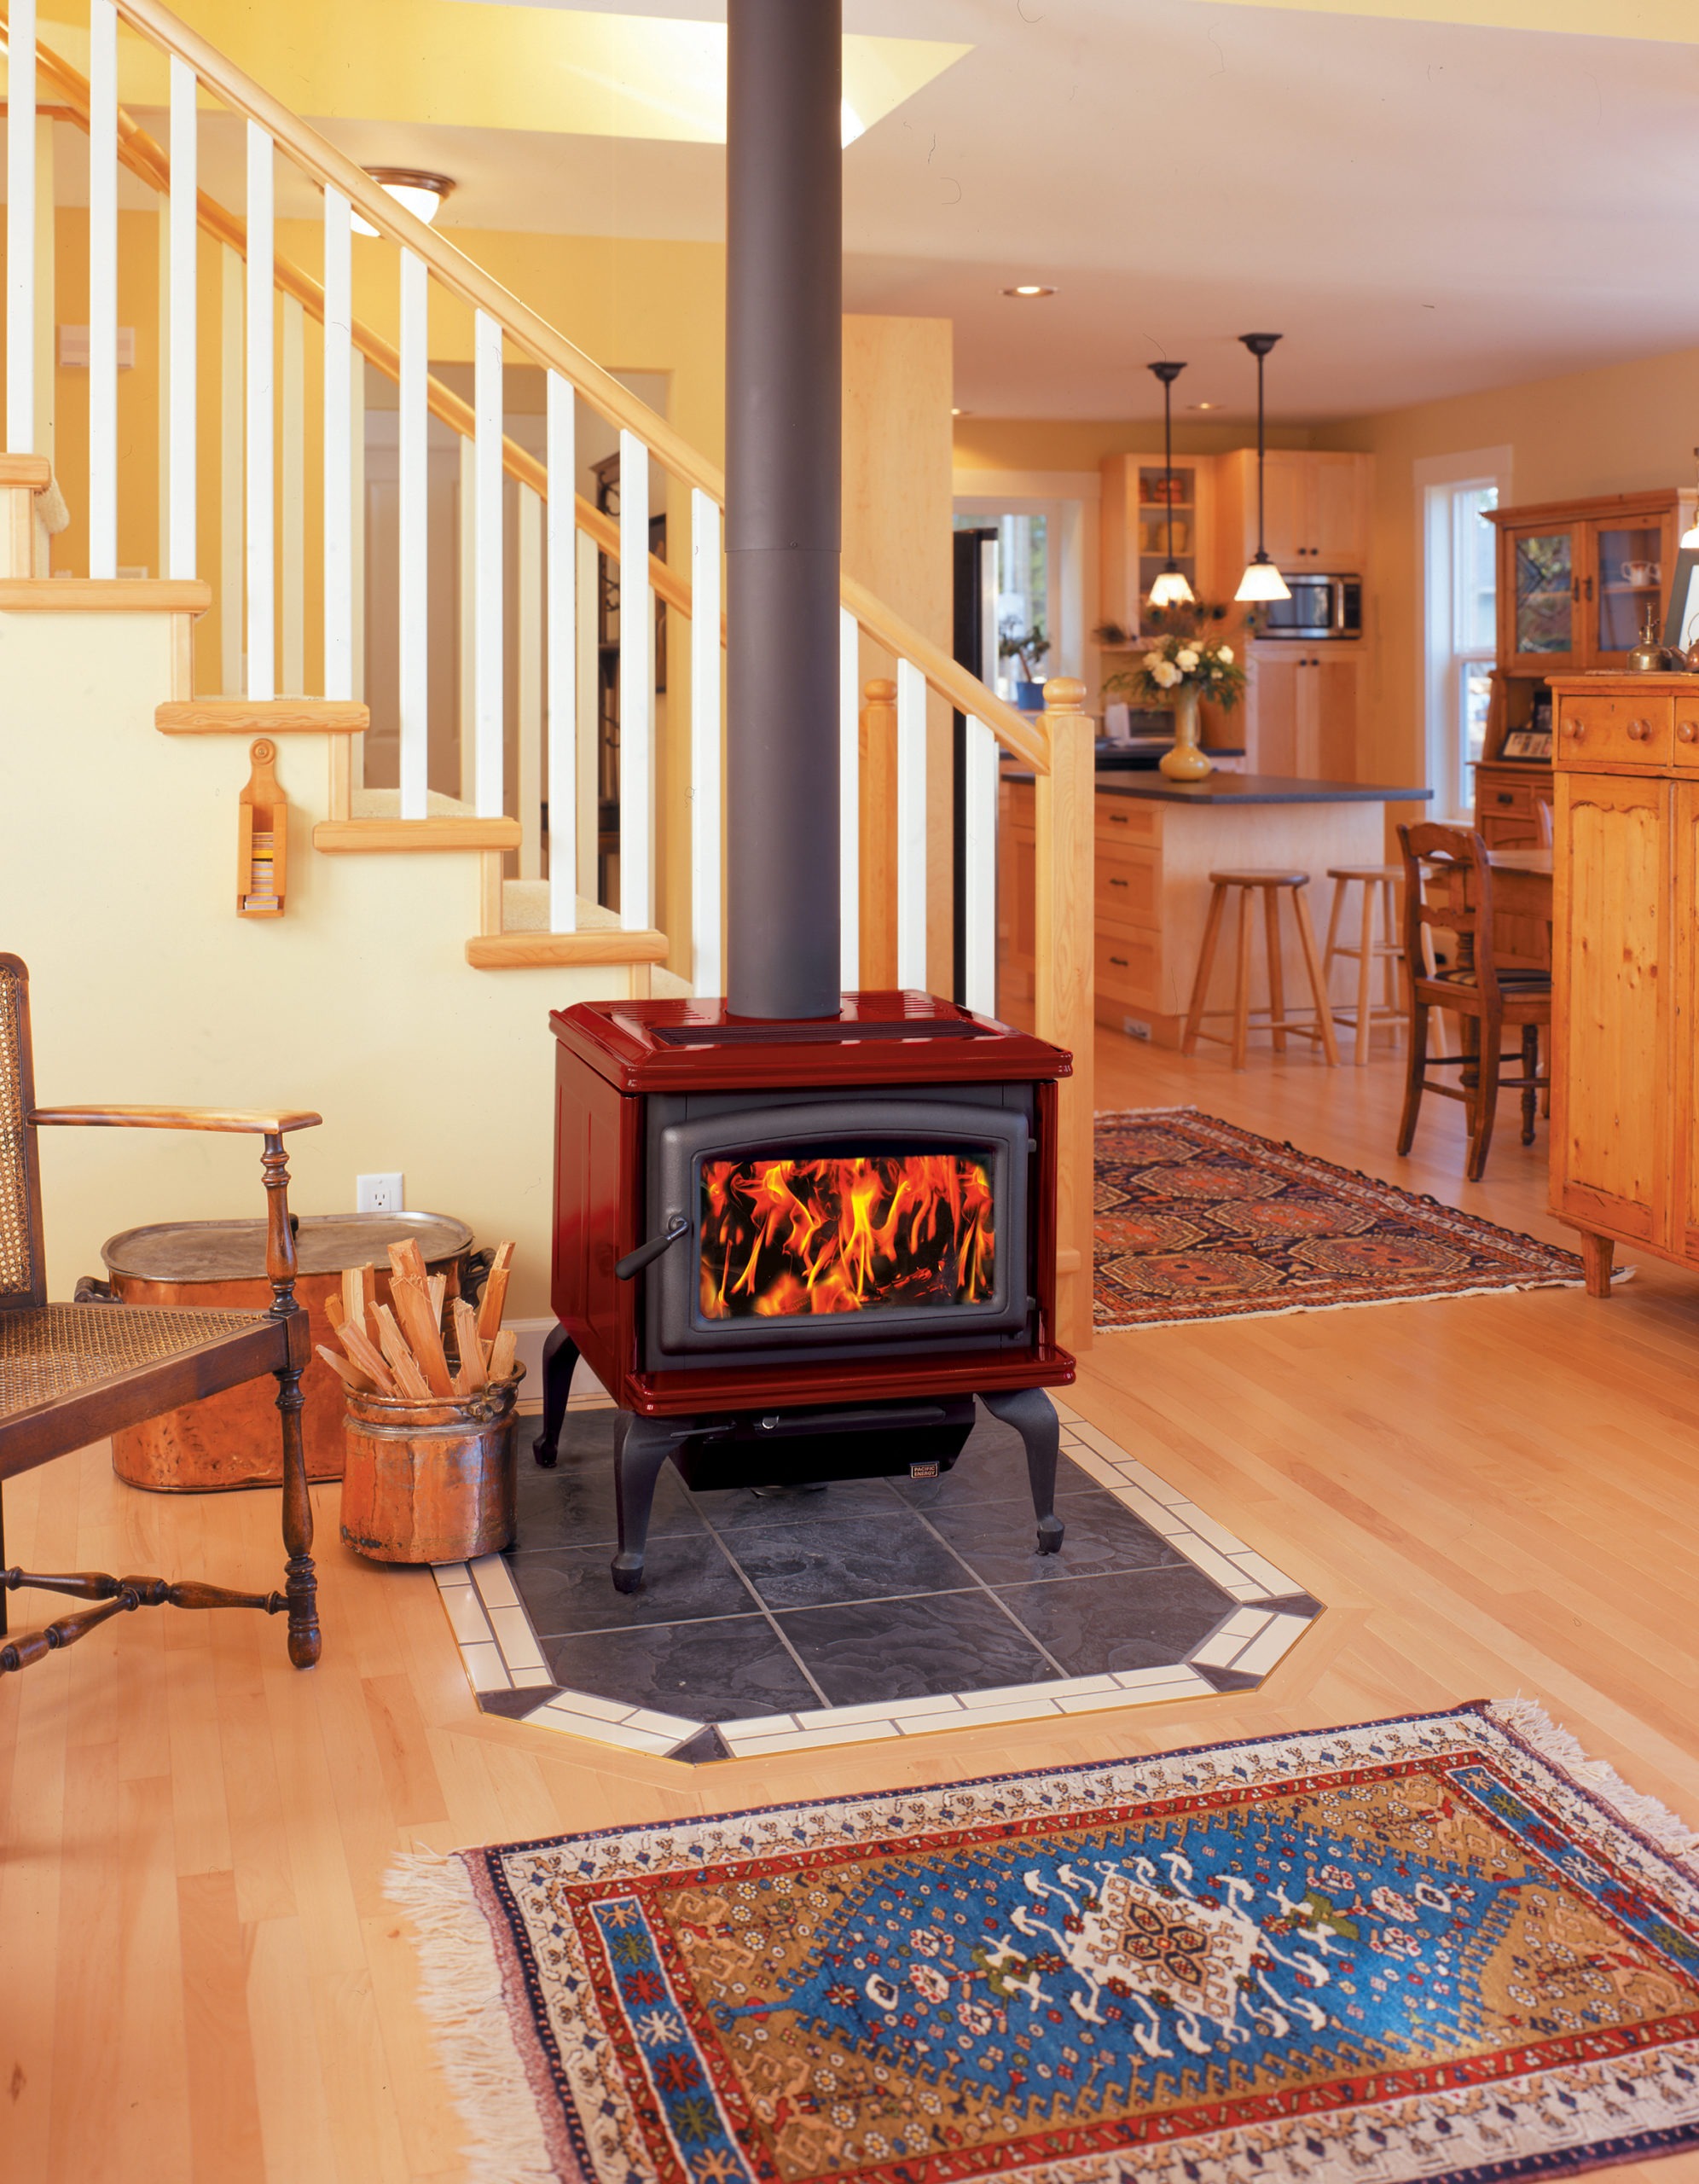 Summit Classic LE wood stove with Sunset Red porcelain enamel panels, metallic black legs, doors and trivet